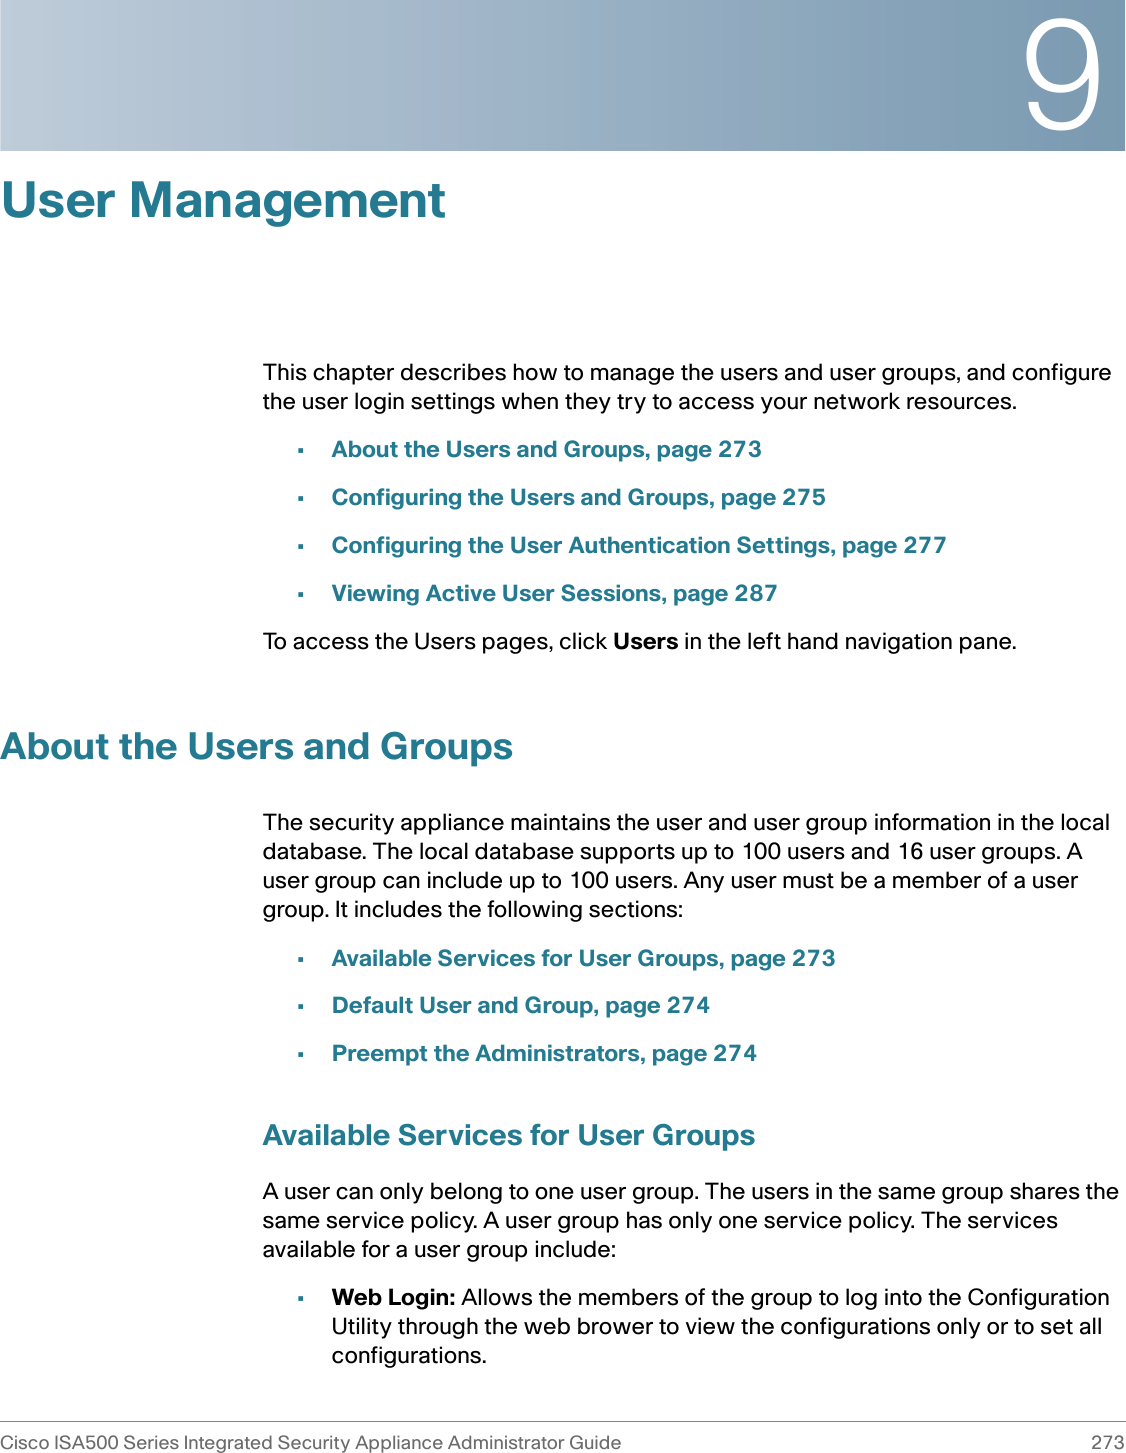 9Cisco ISA500 Series Integrated Security Appliance Administrator Guide 273 User ManagementThis chapter describes how to manage the users and user groups, and configure the user login settings when they try to access your network resources. •About the Users and Groups, page 273•Configuring the Users and Groups, page 275•Configuring the User Authentication Settings, page 277•Viewing Active User Sessions, page 287To access the Users pages, click Users in the left hand navigation pane.About the Users and GroupsThe security appliance maintains the user and user group information in the local database. The local database supports up to 100 users and 16 user groups. A user group can include up to 100 users. Any user must be a member of a user group. It includes the following sections: •Available Services for User Groups, page 273•Default User and Group, page 274•Preempt the Administrators, page 274Available Services for User GroupsA user can only belong to one user group. The users in the same group shares the same service policy. A user group has only one service policy. The services available for a user group include: •Web Login: Allows the members of the group to log into the Configuration Utility through the web brower to view the configurations only or to set all configurations. 